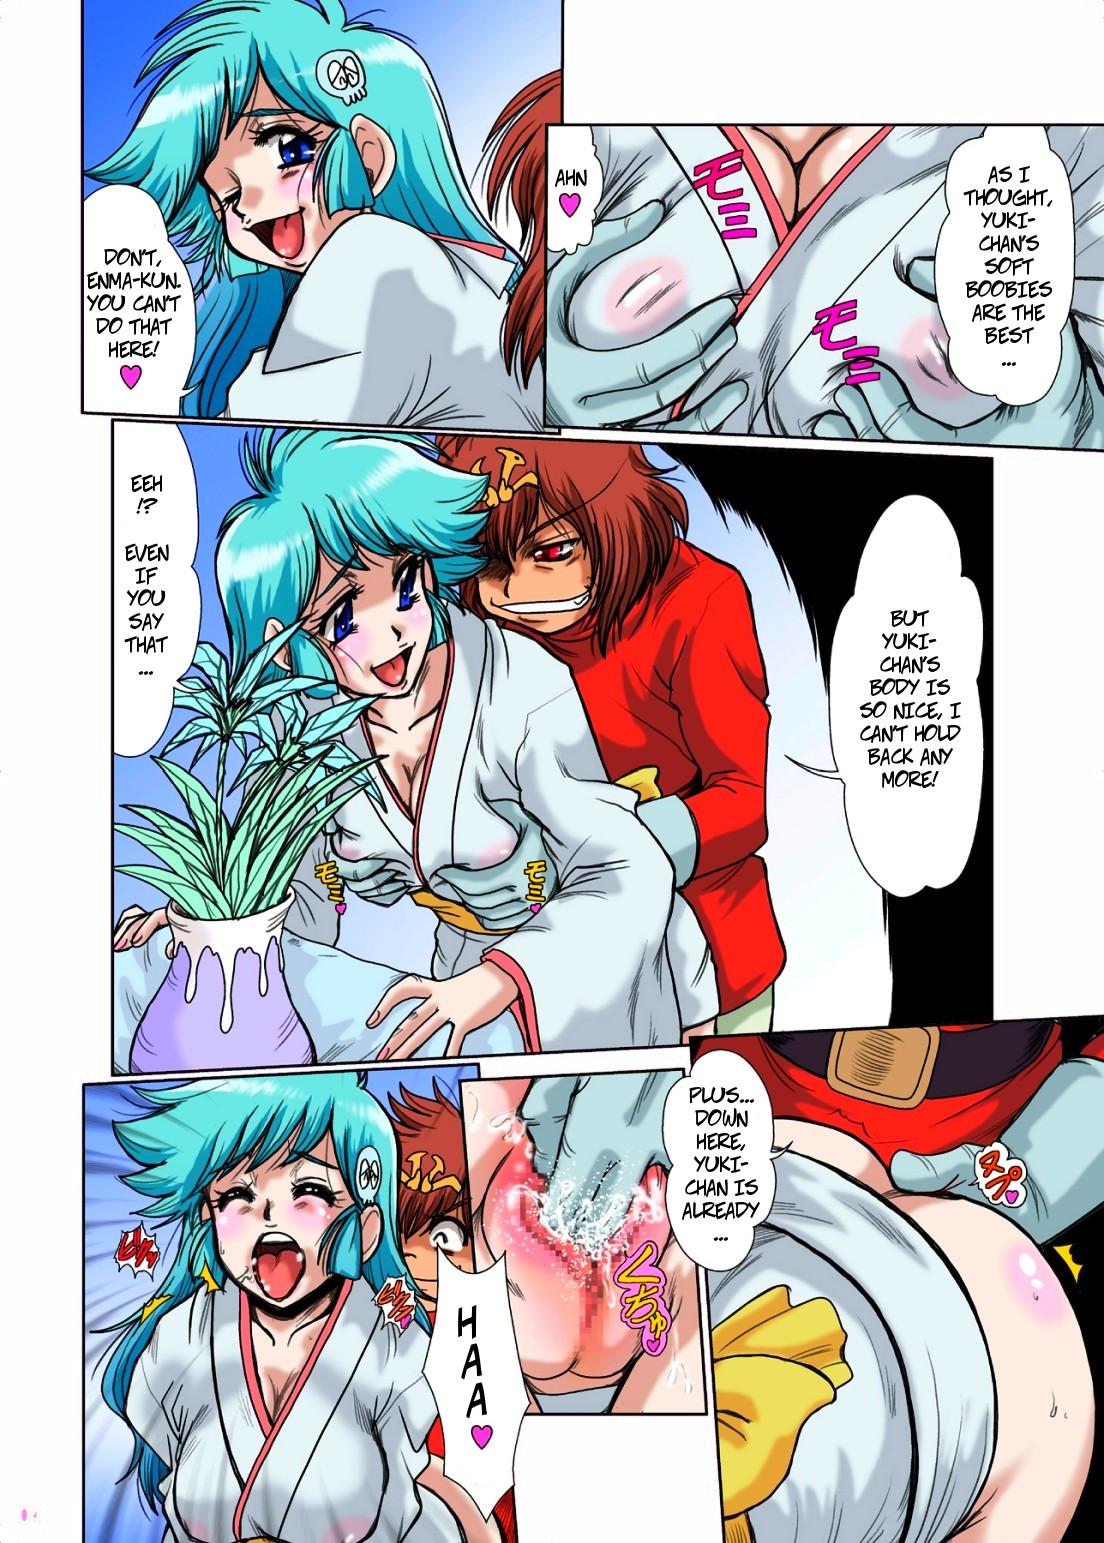 Parties Something Sexy This Way Comes - Dororon enma-kun Sissy - Page 3